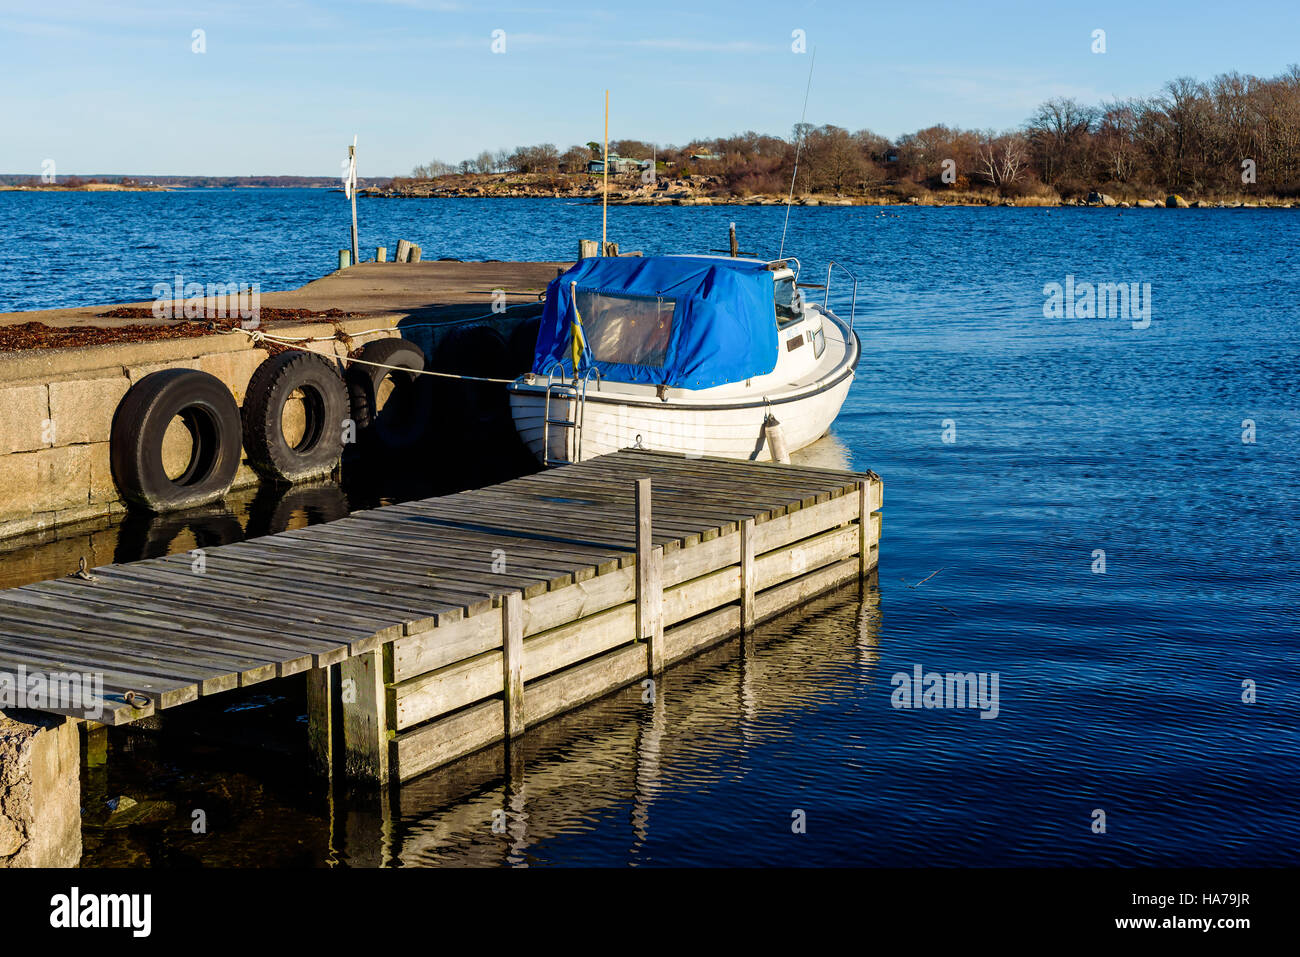 Tjurko, Sweden - November 24, 2016: Travel documentary of small local marina in fall. One motorboat moored dockside and the archipelago visible in the Stock Photo